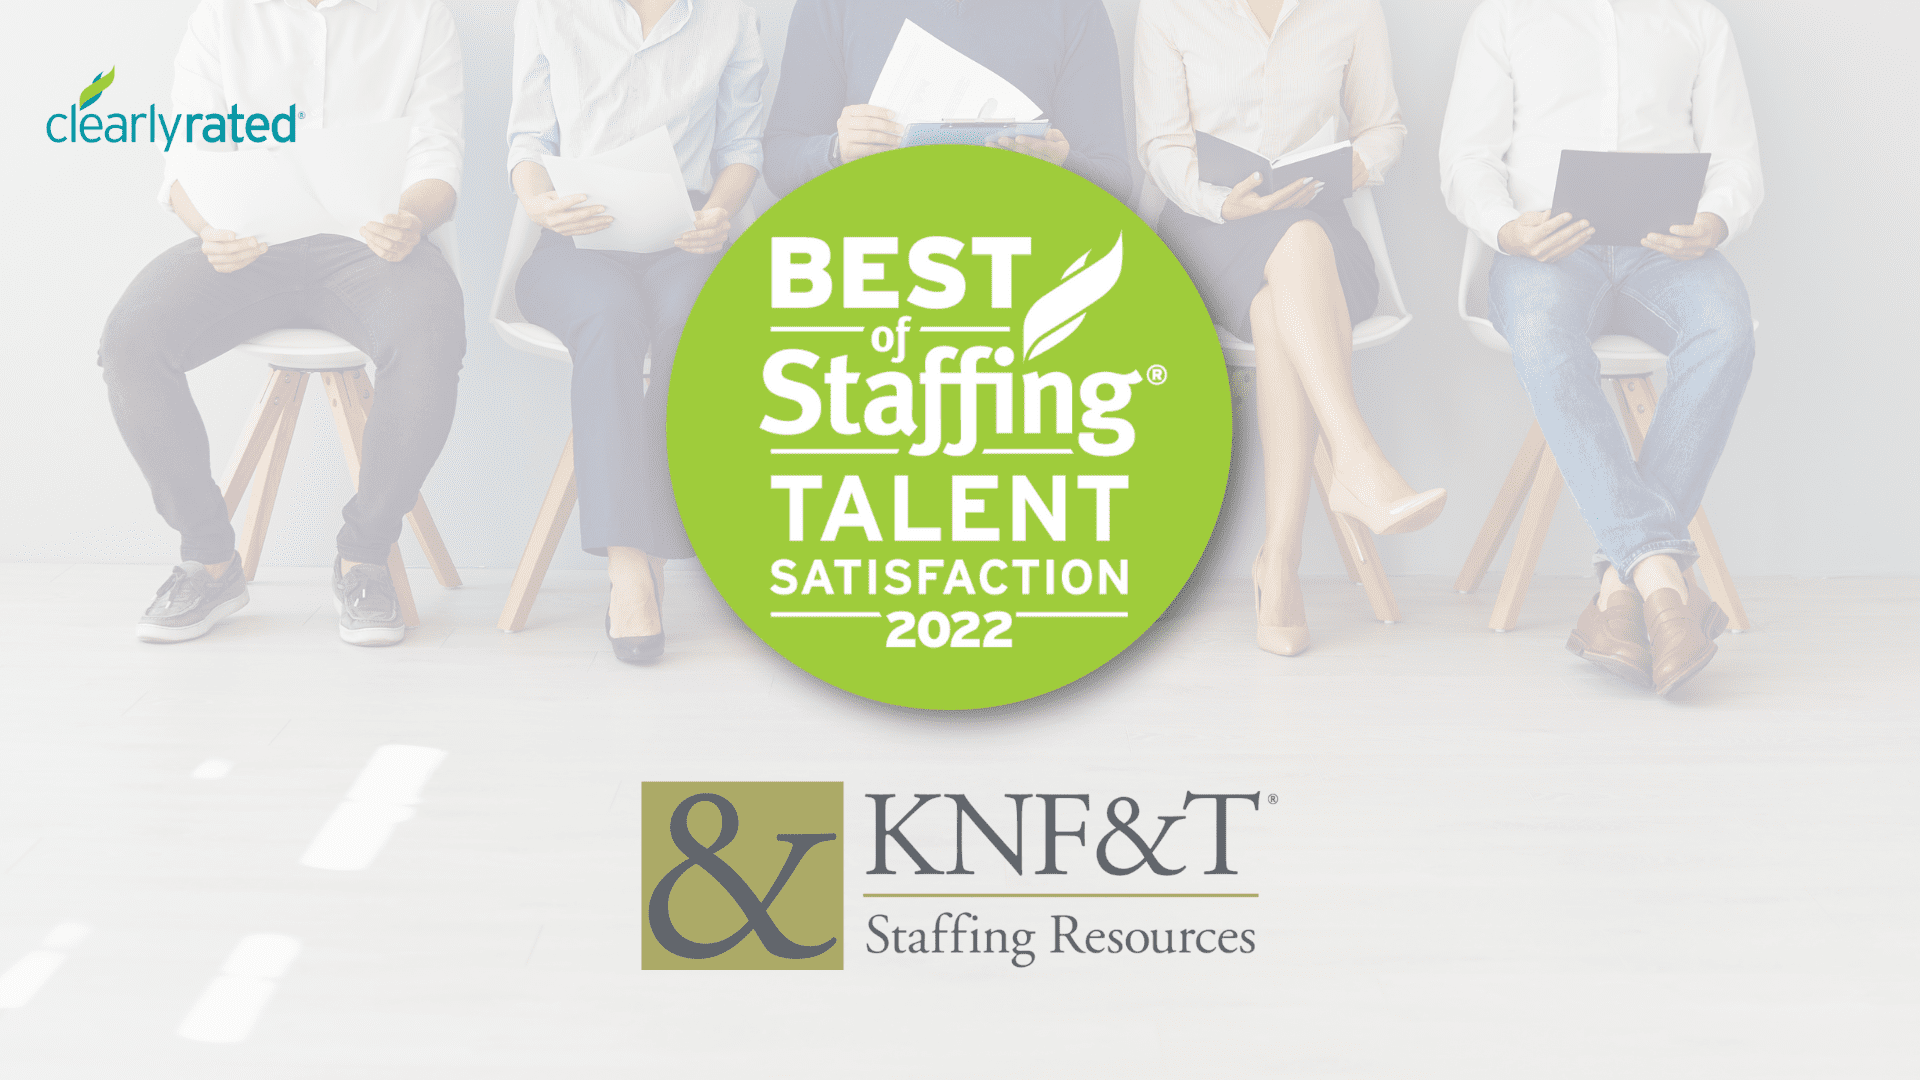 Knf&T Staffing Resources Wins Clearlyrated’S 2022 Best Of Staffing Talent Award For Service Excellence